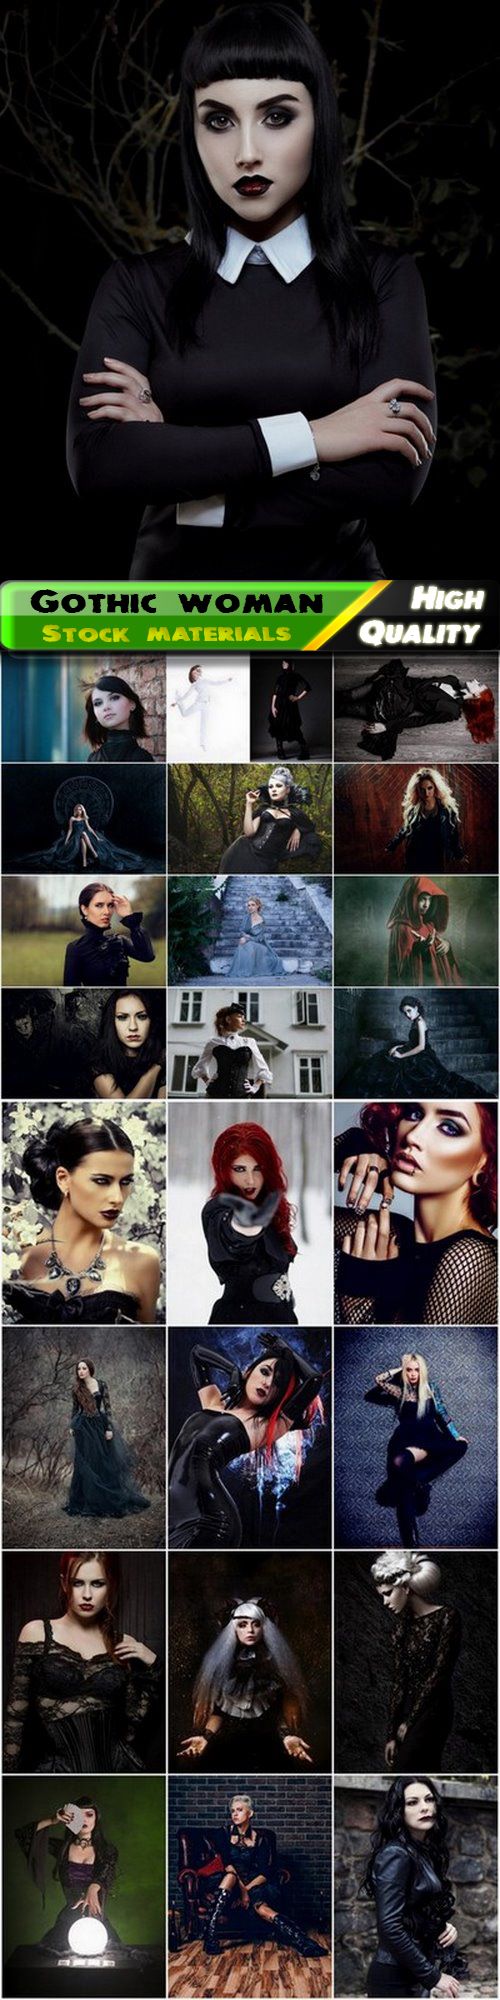 Gothic woman and girl dressed in dark clothes 25 HQ Jpg